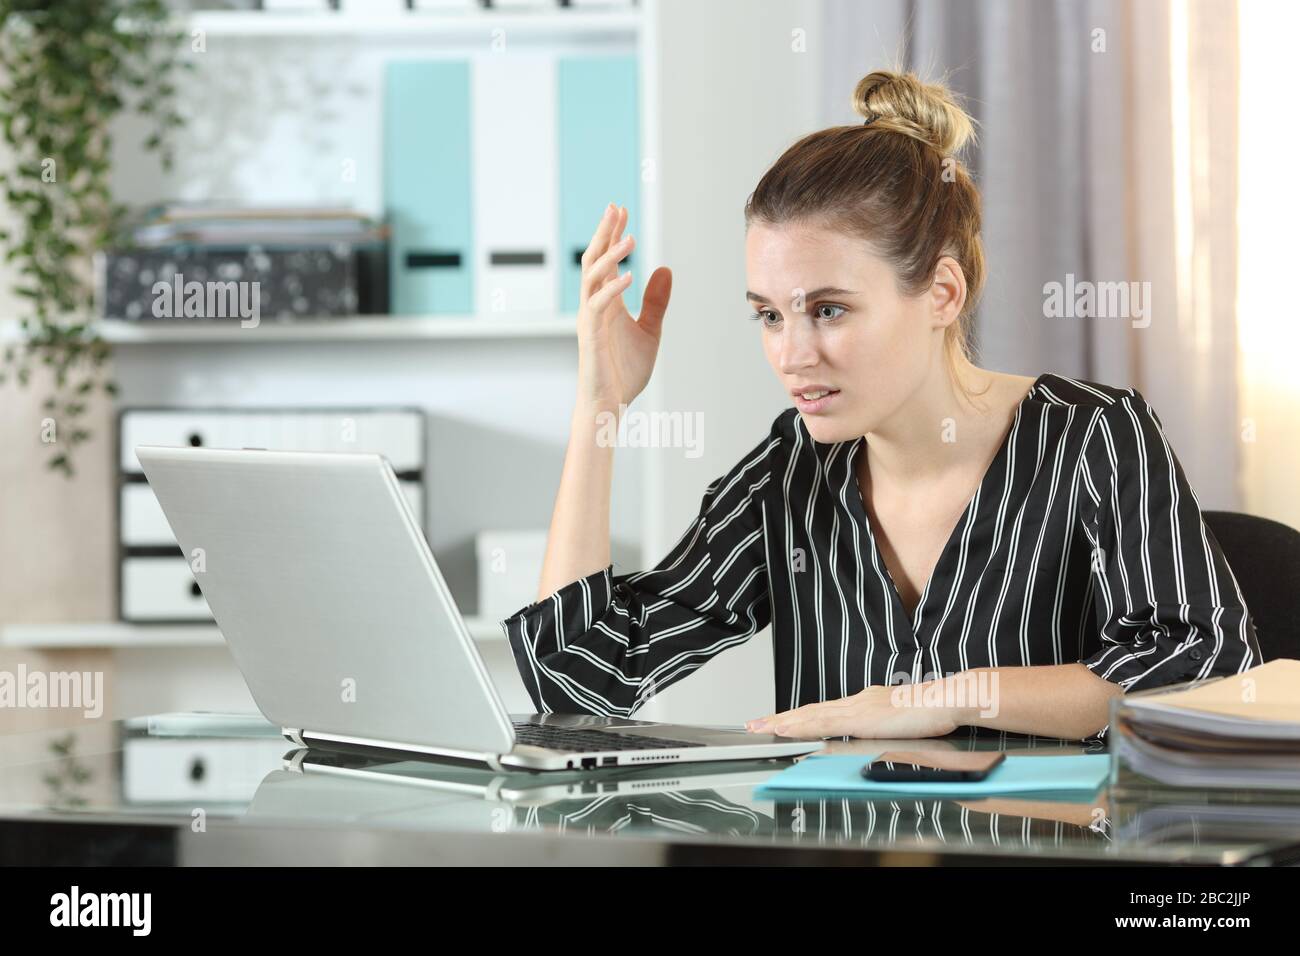 Frustrated entrepreneur woman with laptop complaining sitting on a desk in the office Stock Photo